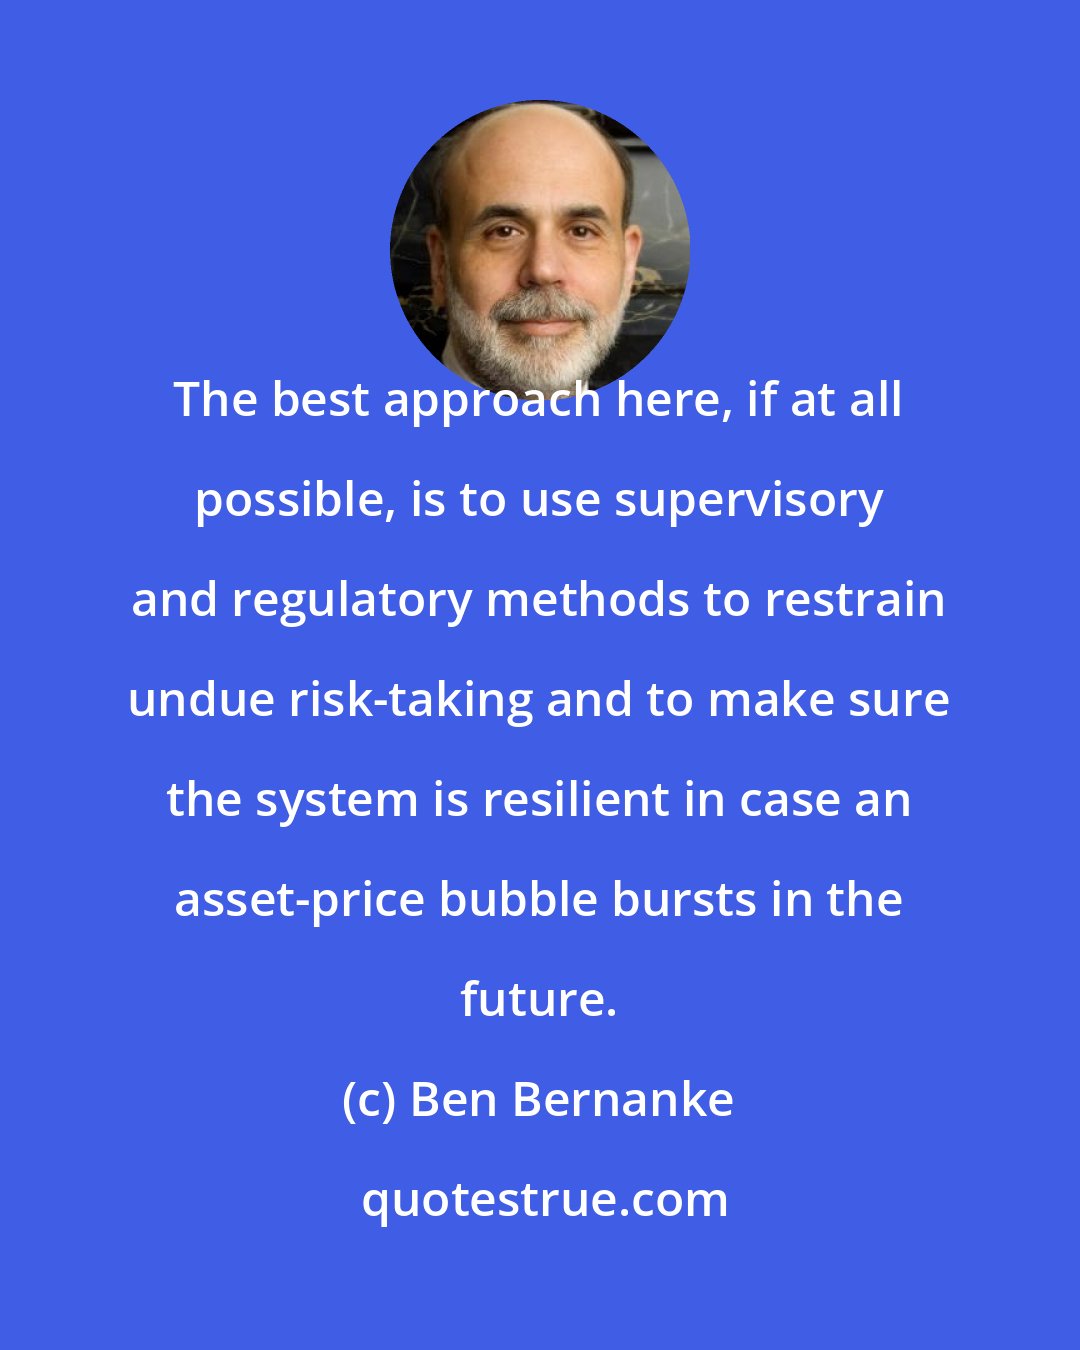 Ben Bernanke: The best approach here, if at all possible, is to use supervisory and regulatory methods to restrain undue risk-taking and to make sure the system is resilient in case an asset-price bubble bursts in the future.